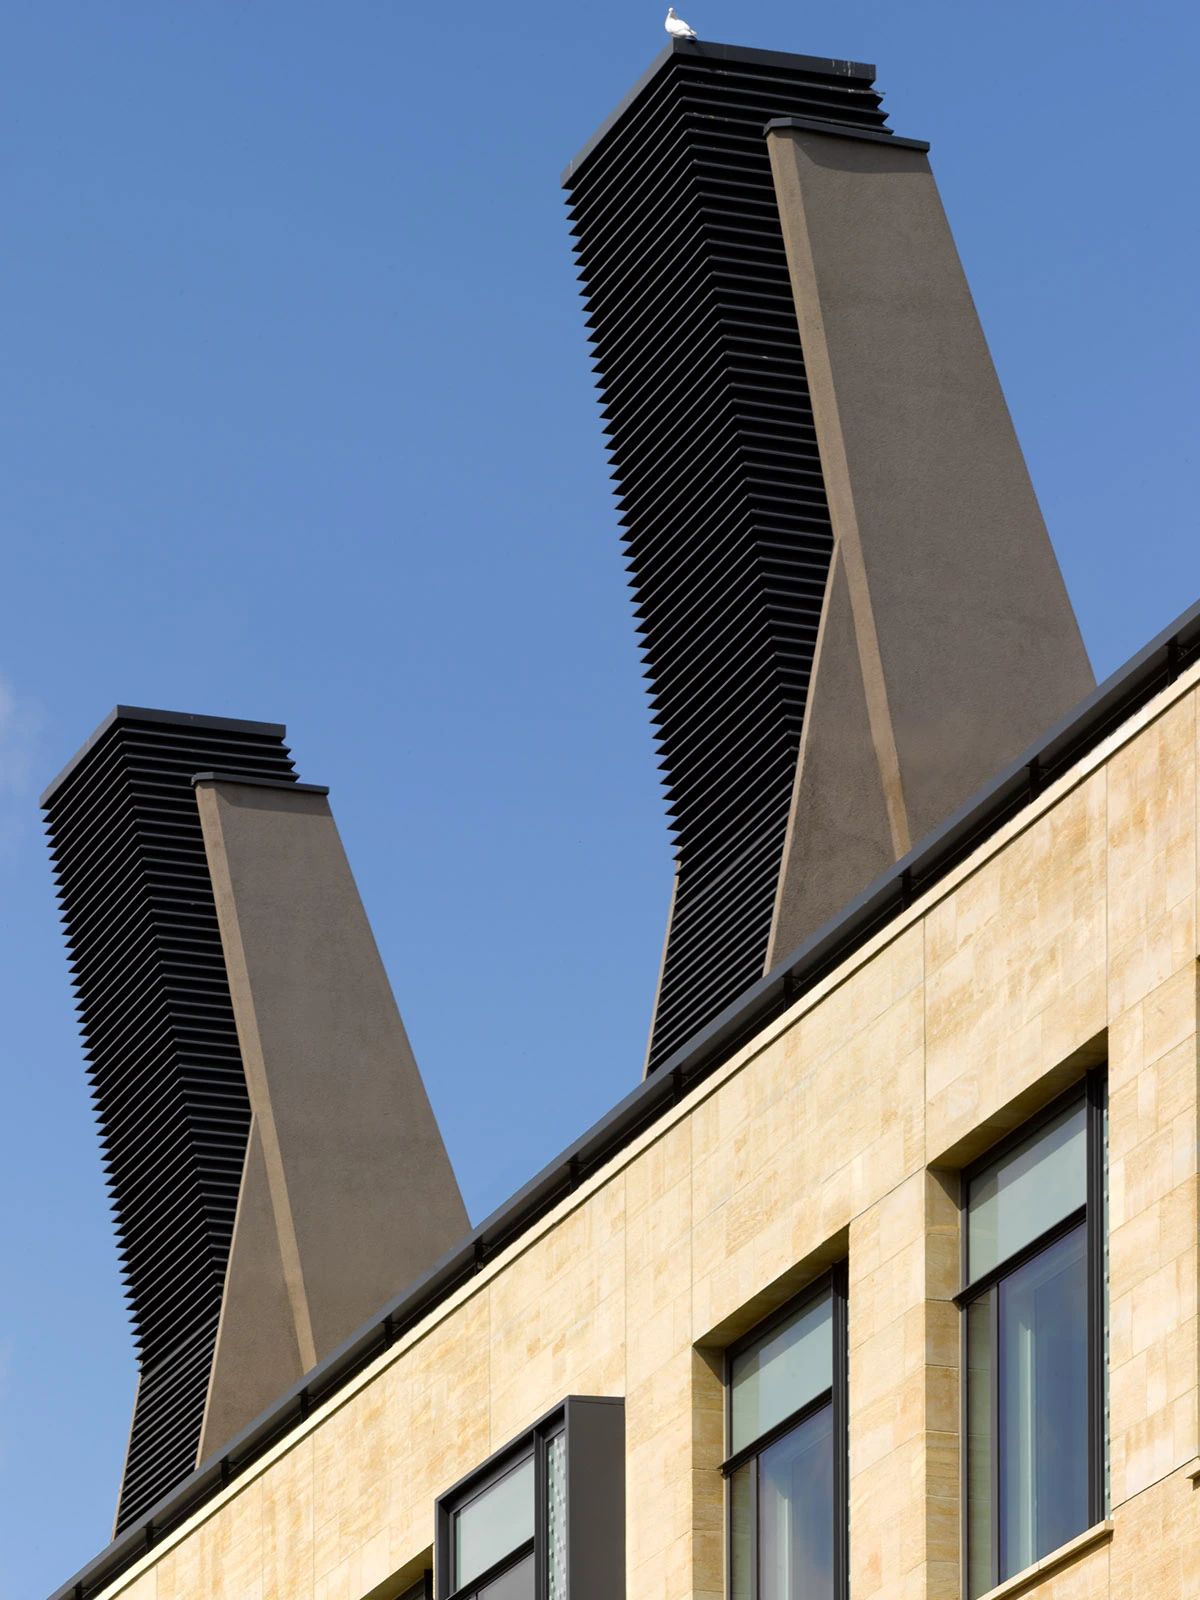 Exterior detail of the Earth Sciences Department at Oxford University